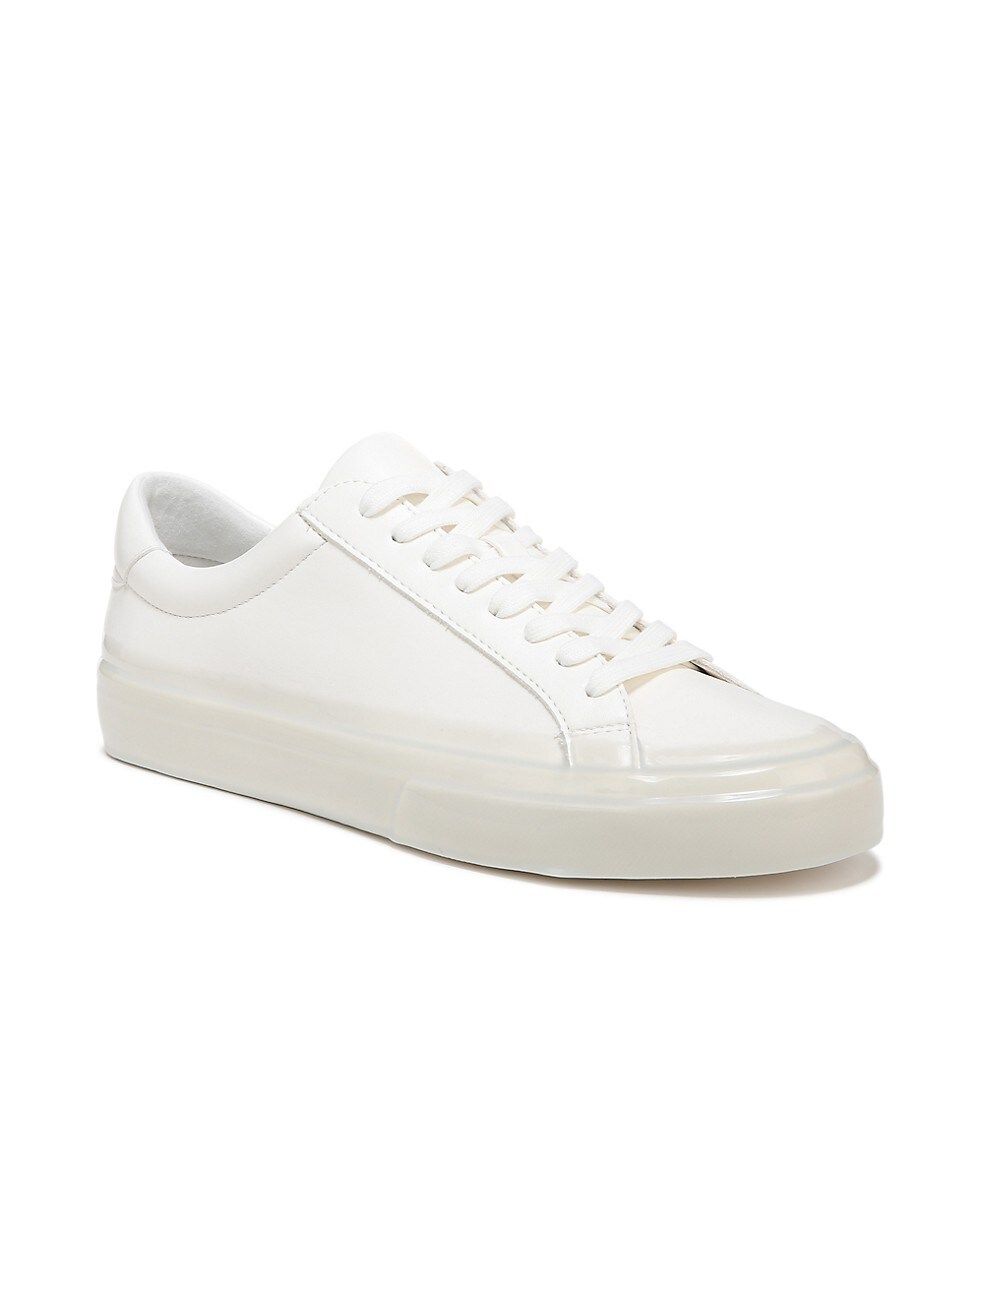 Fultondipped Leather Oxford Sneakers | Saks Fifth Avenue